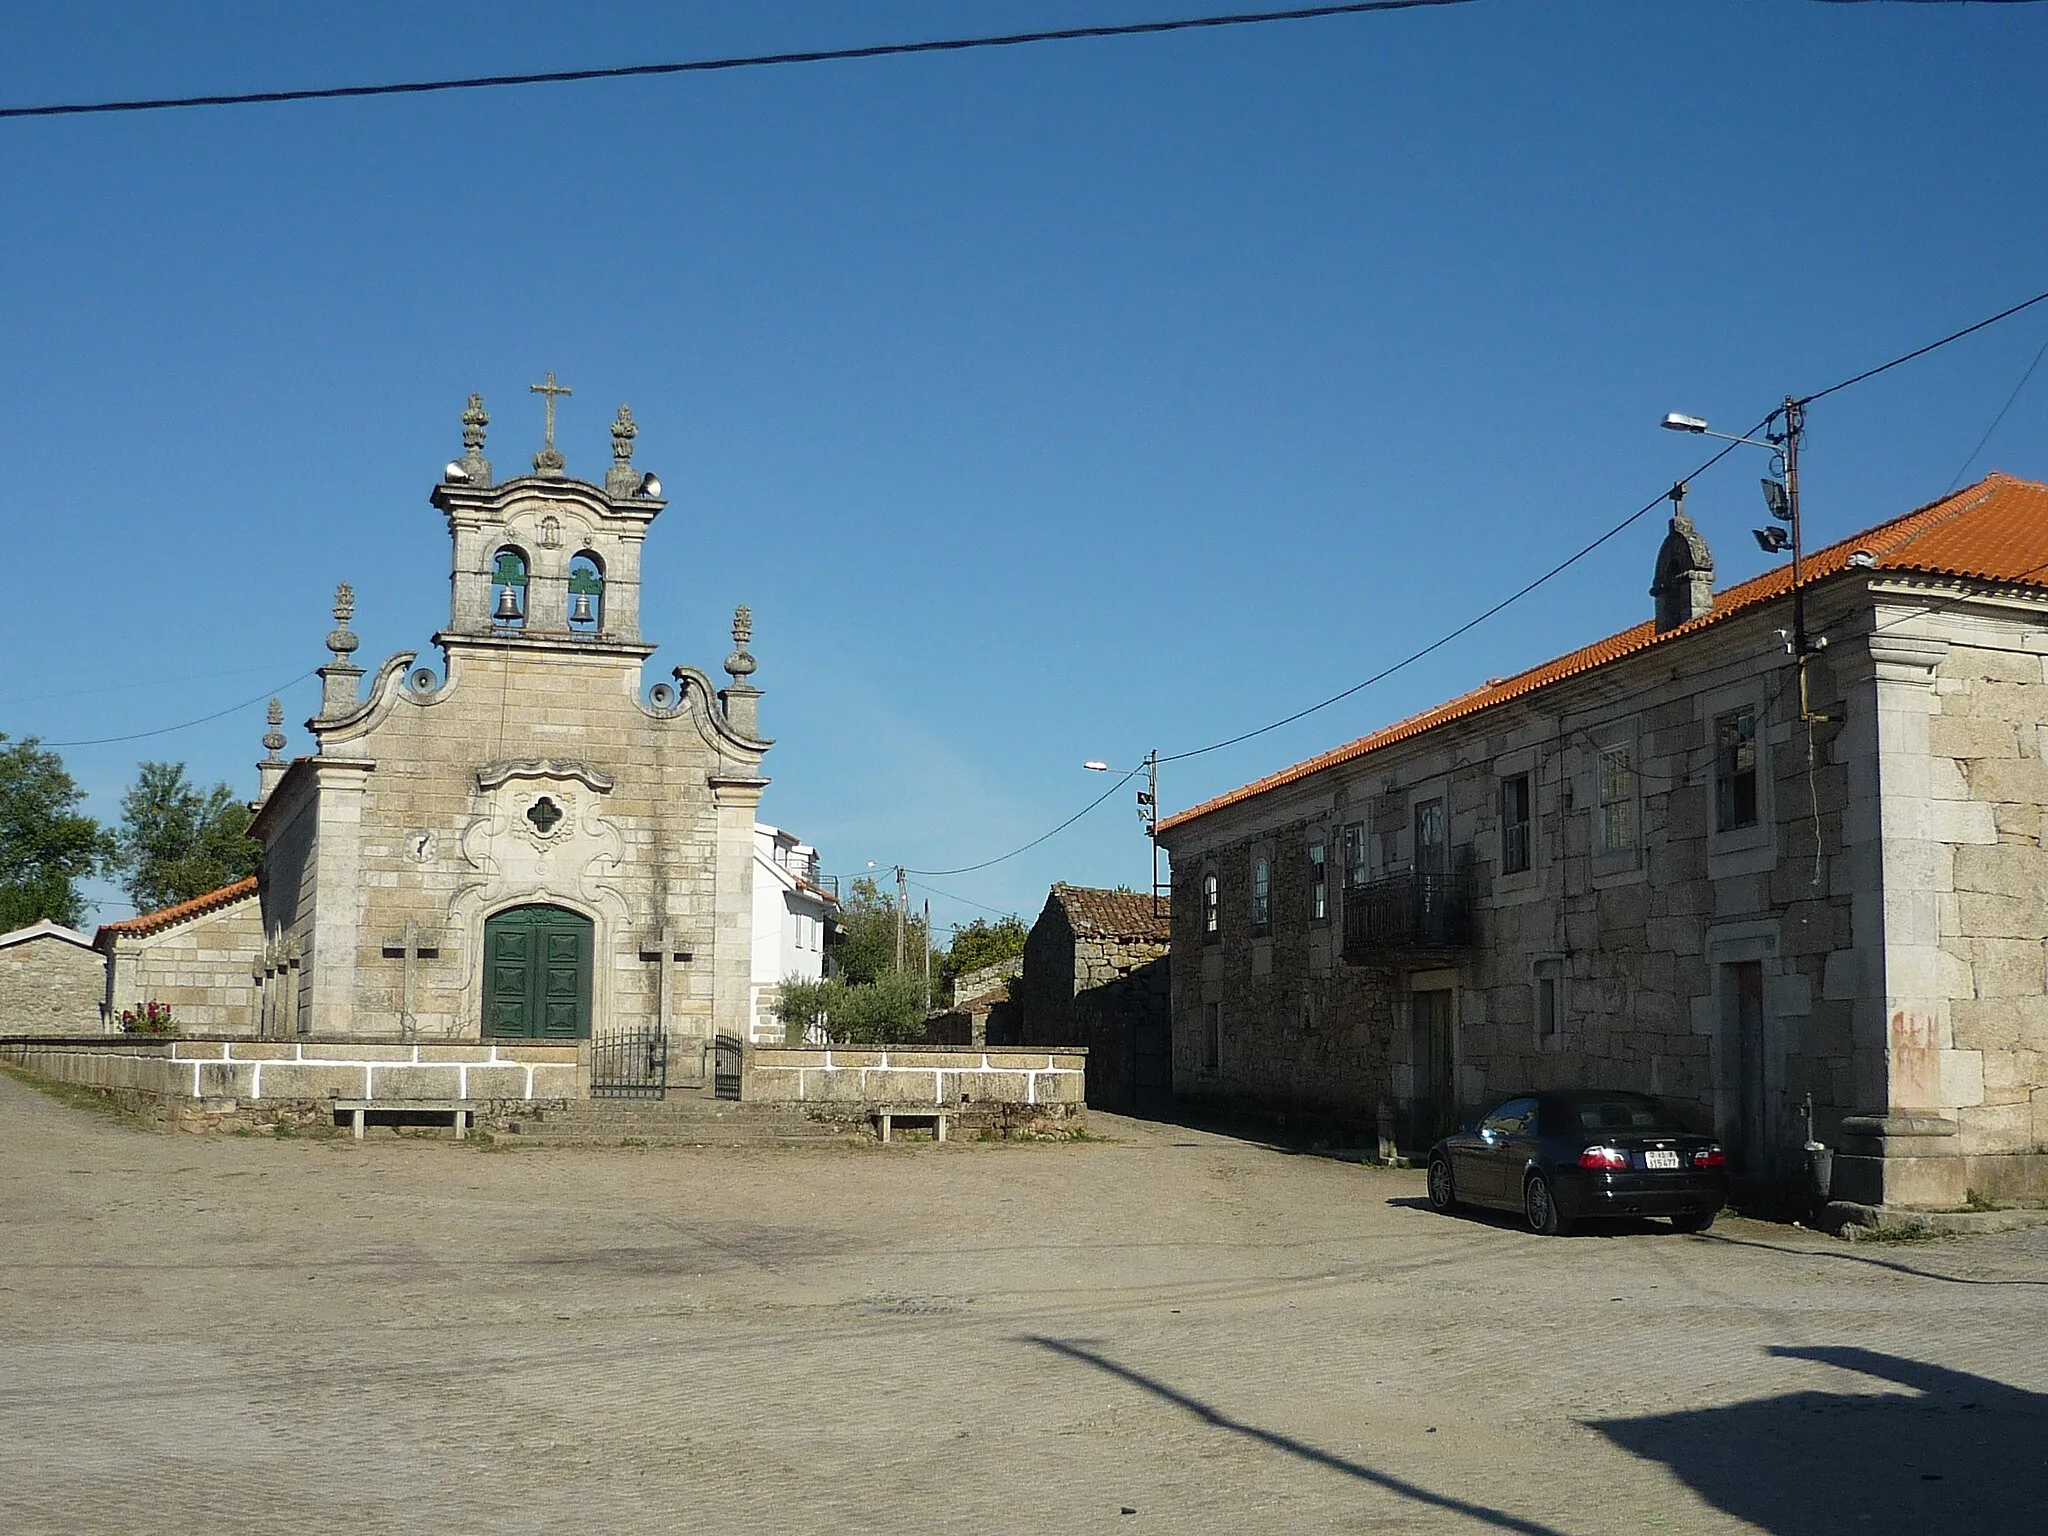 Photo showing: The Church of St. John the Baptist, the parochial church of Marzagão, in the civil parish of Marzagão, municipality of Carrazeda de Ansiães, Portugal